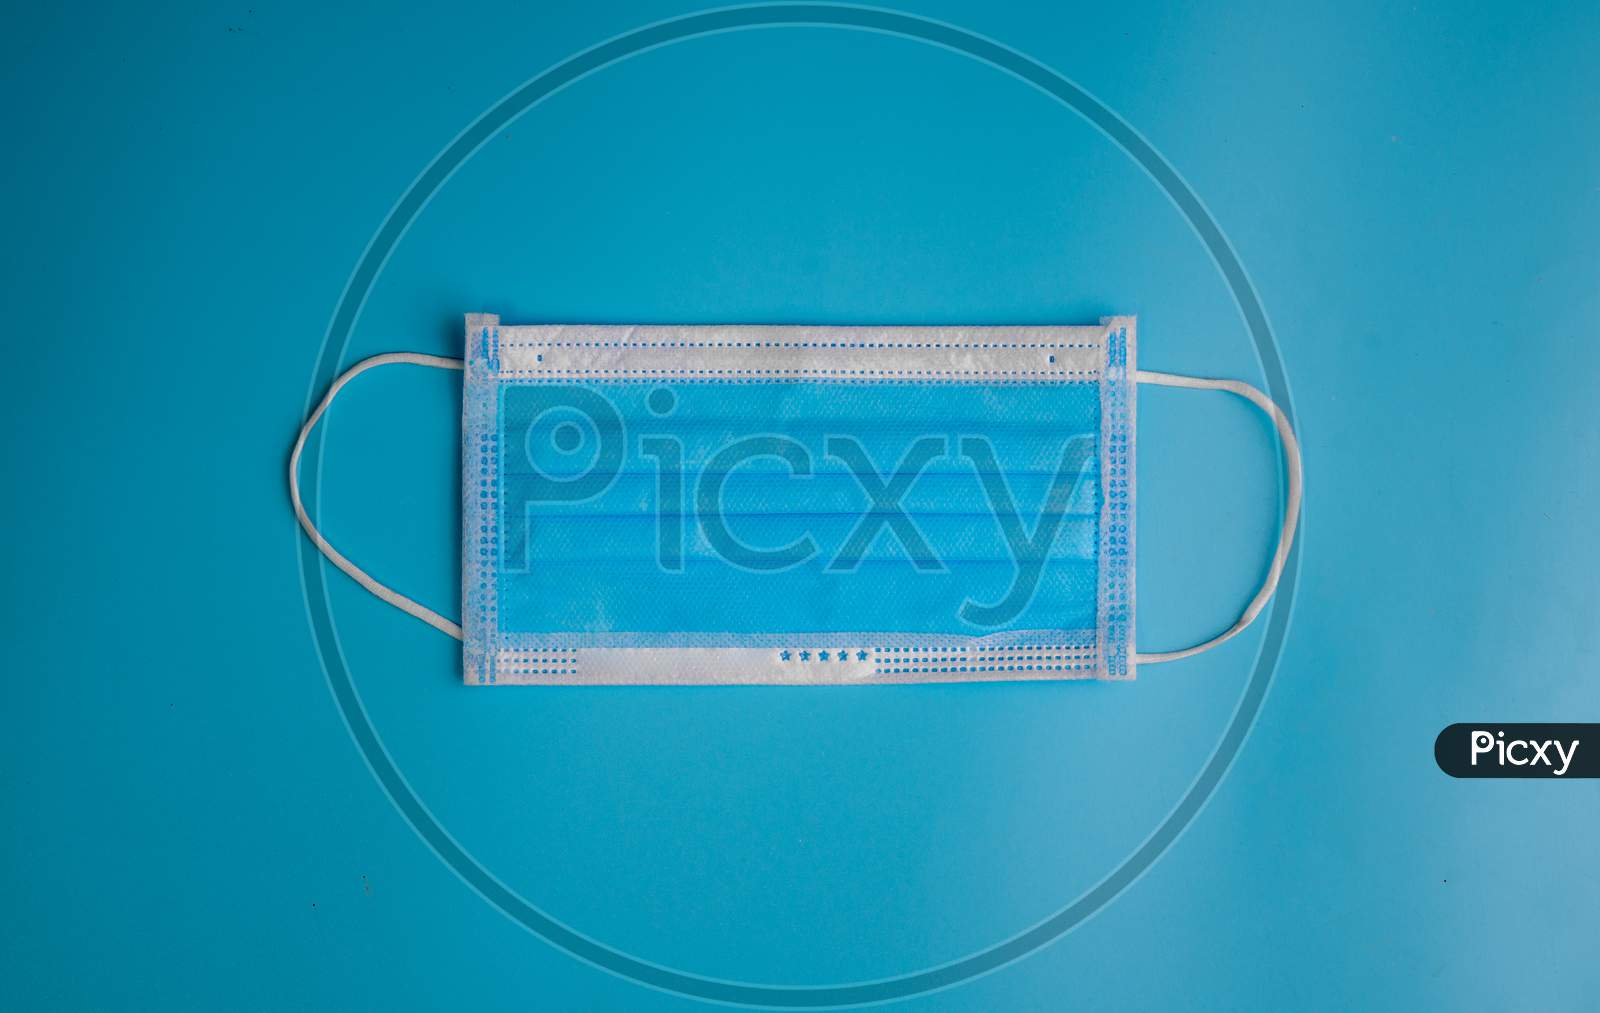 Blue Medical Disposable Face Mask With Covid-19 Printed On It. Covid-19 - Wuhan Novel Coronavirus Pneumonia Gets Official Name From Who: Covid-19. Disposable Breath Filter Face Mask With Earloop